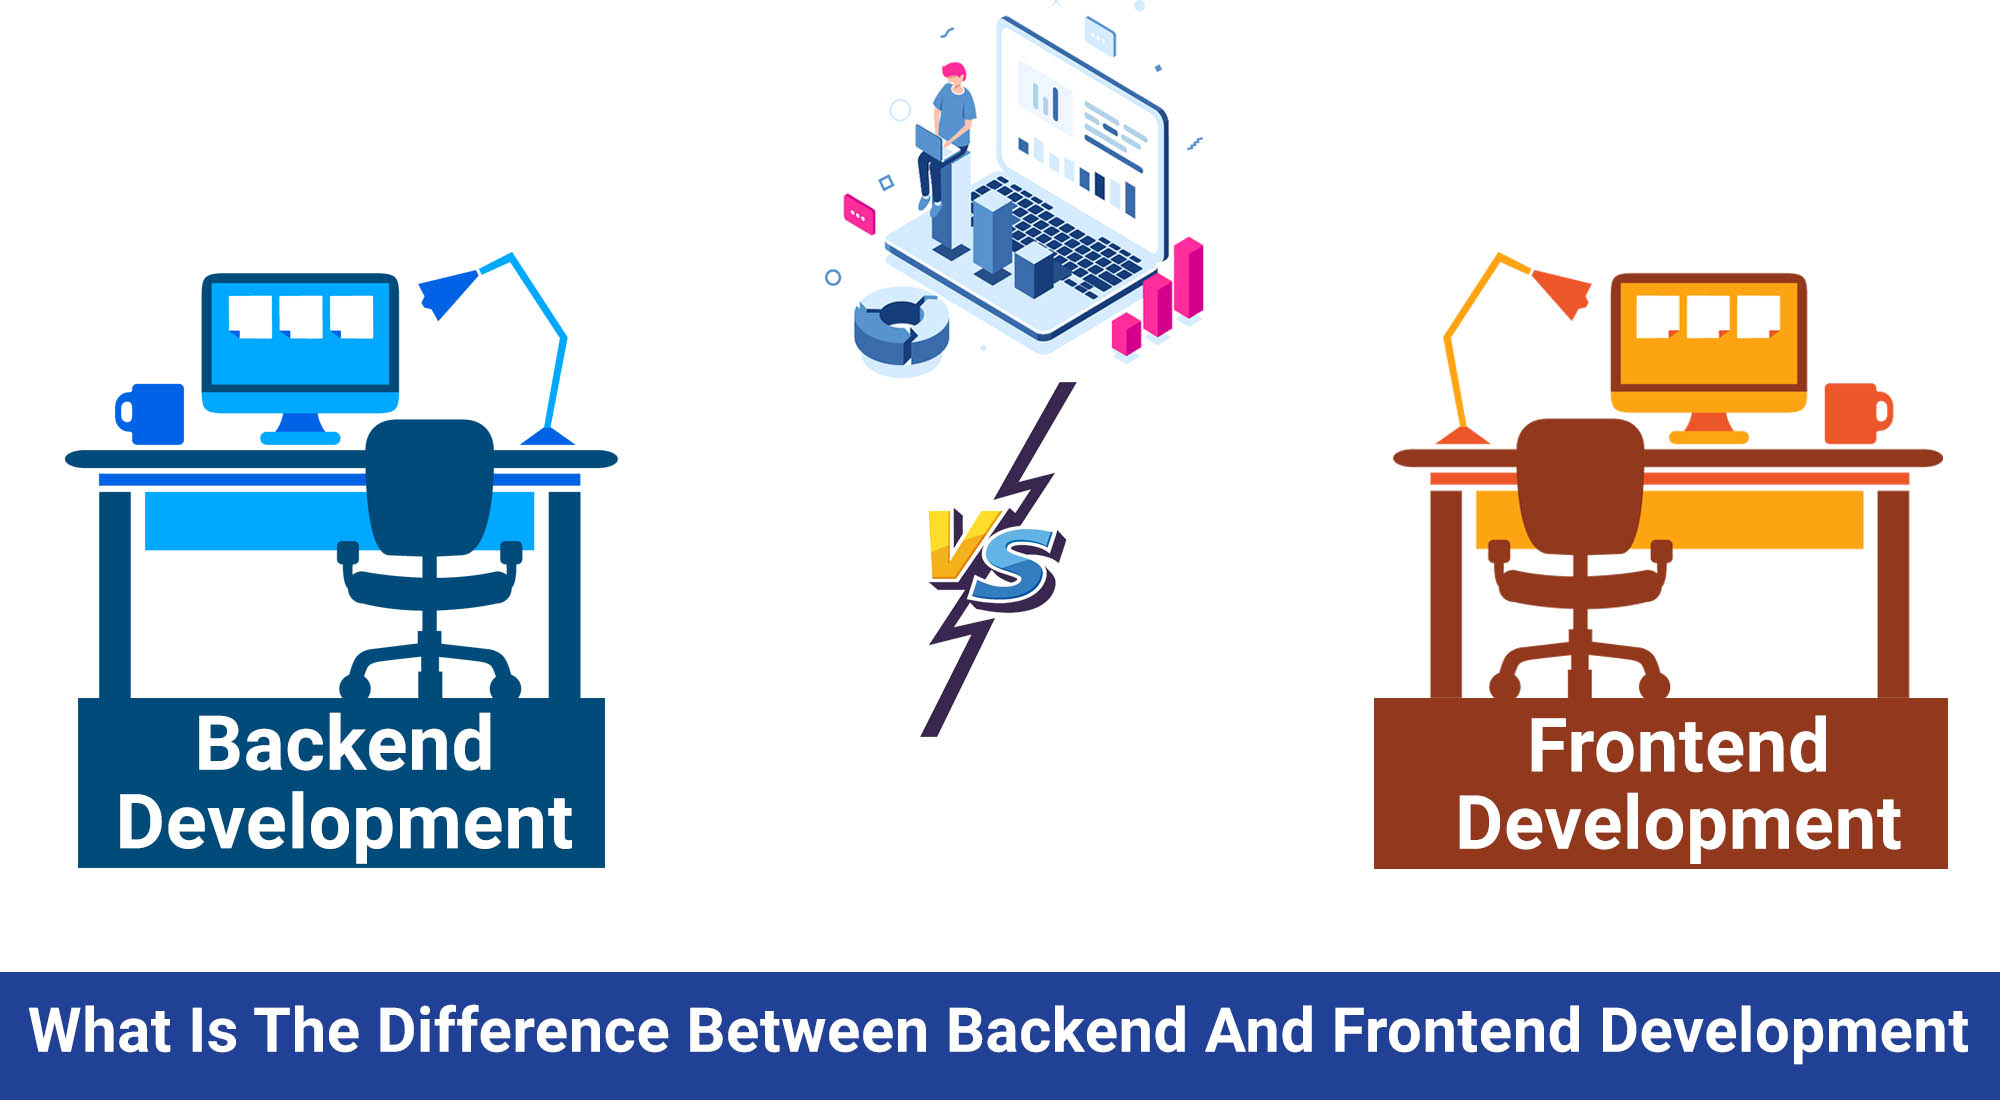 What is the difference between backend and frontend development